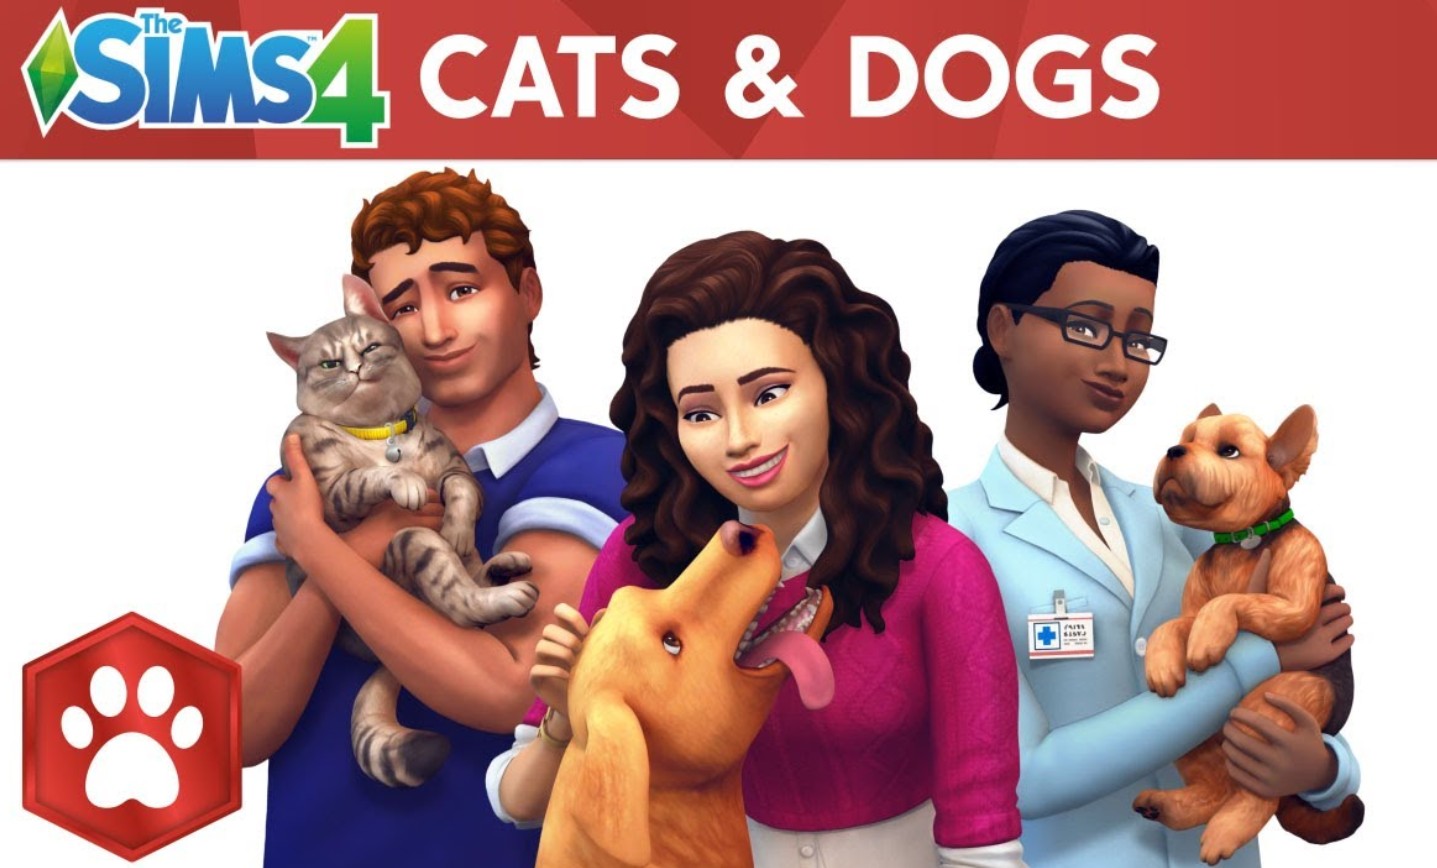 Official Cats and Dogs artwork